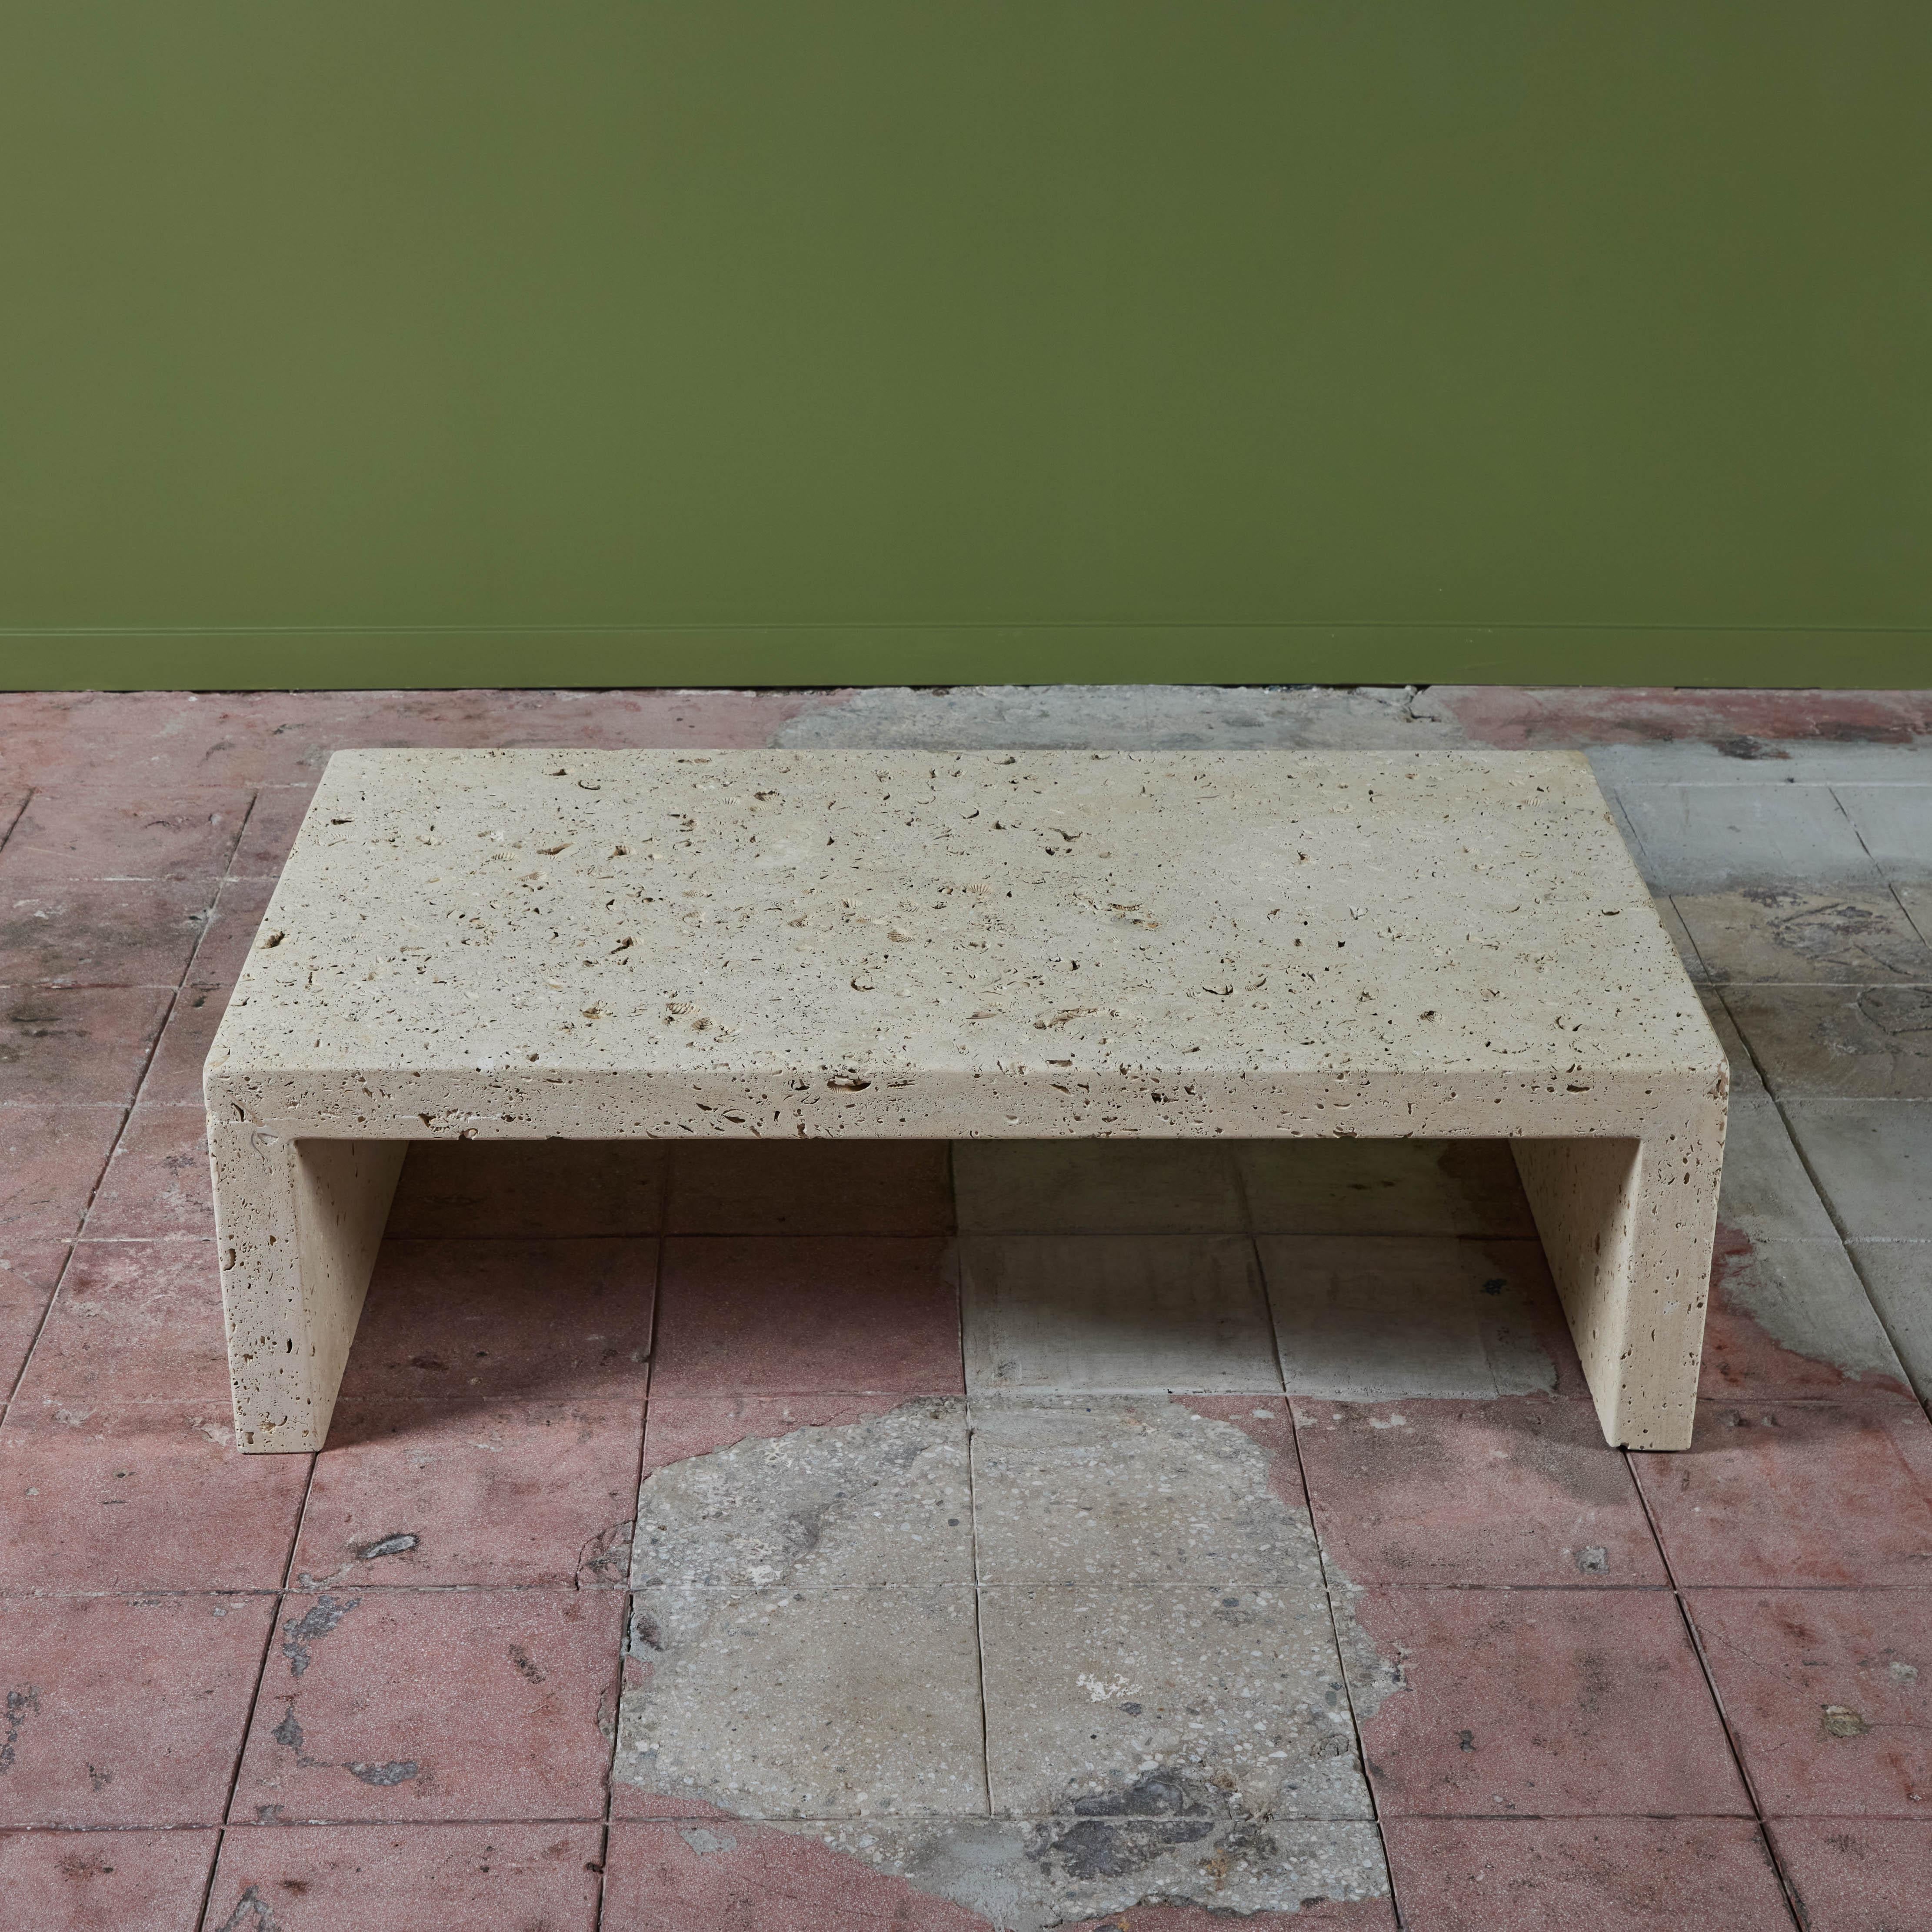 Texas Cordova Shellstone Coffee Table In Excellent Condition For Sale In Los Angeles, CA